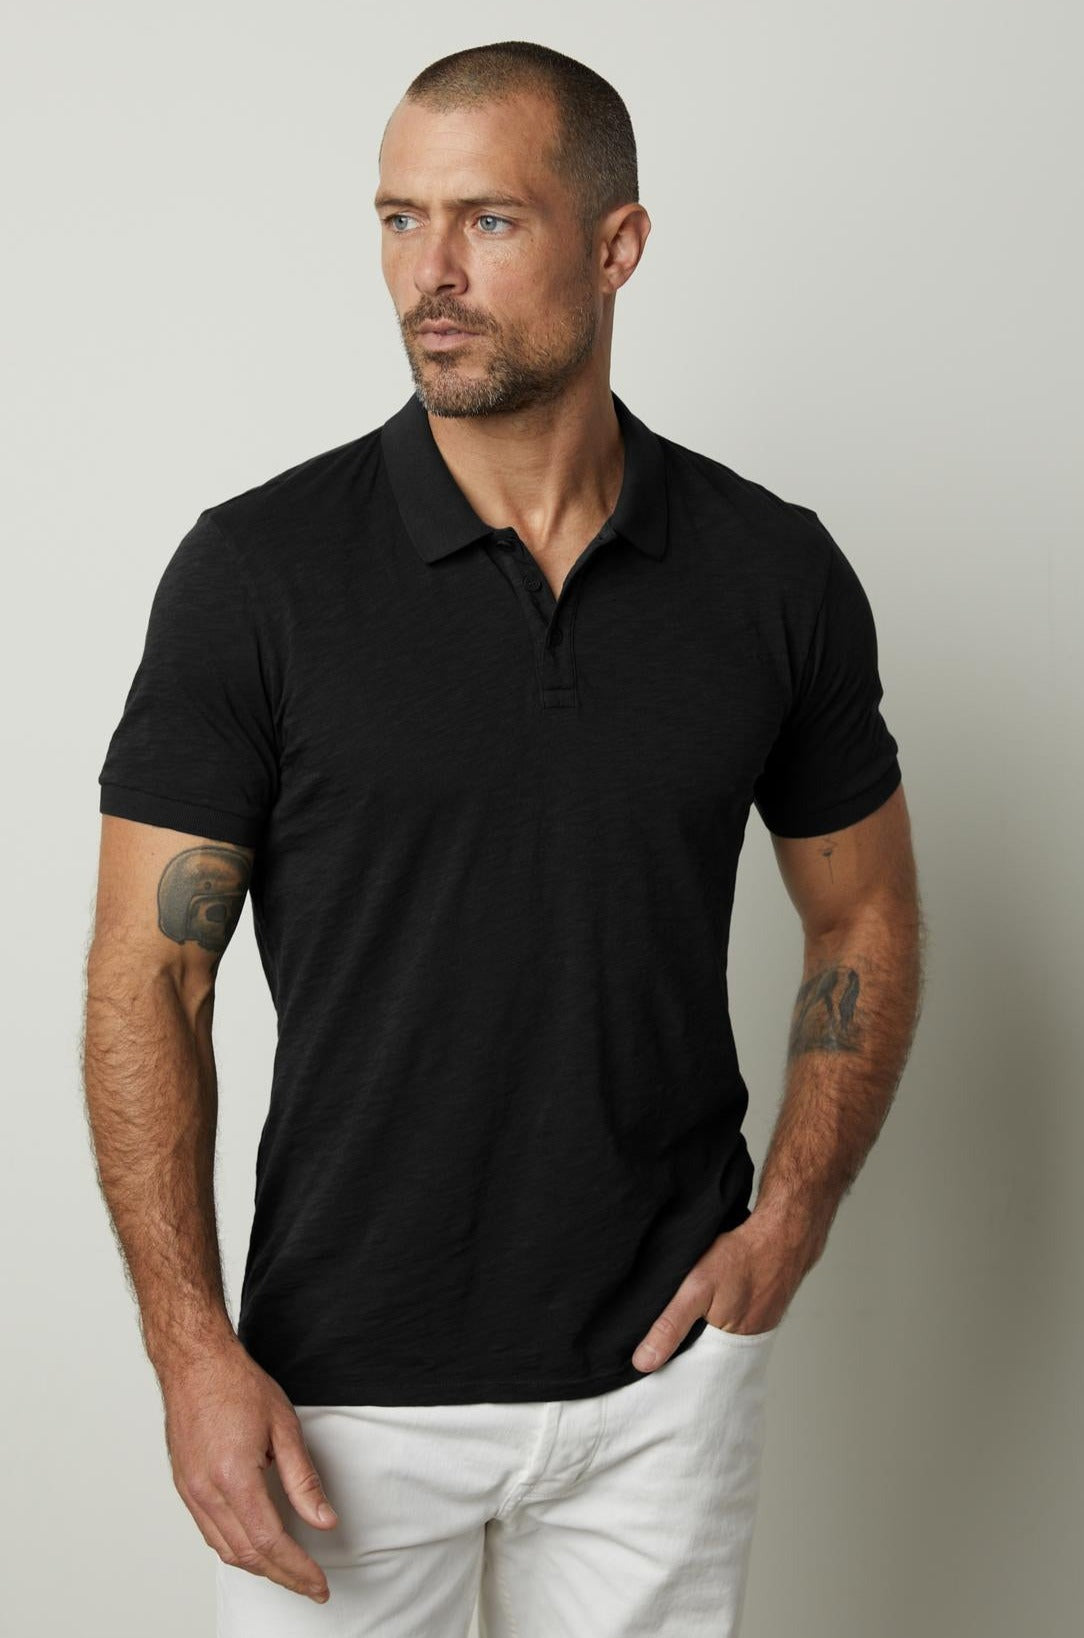   A man wearing a black NIKO POLO shirt by Velvet by Graham & Spencer and white pants. 